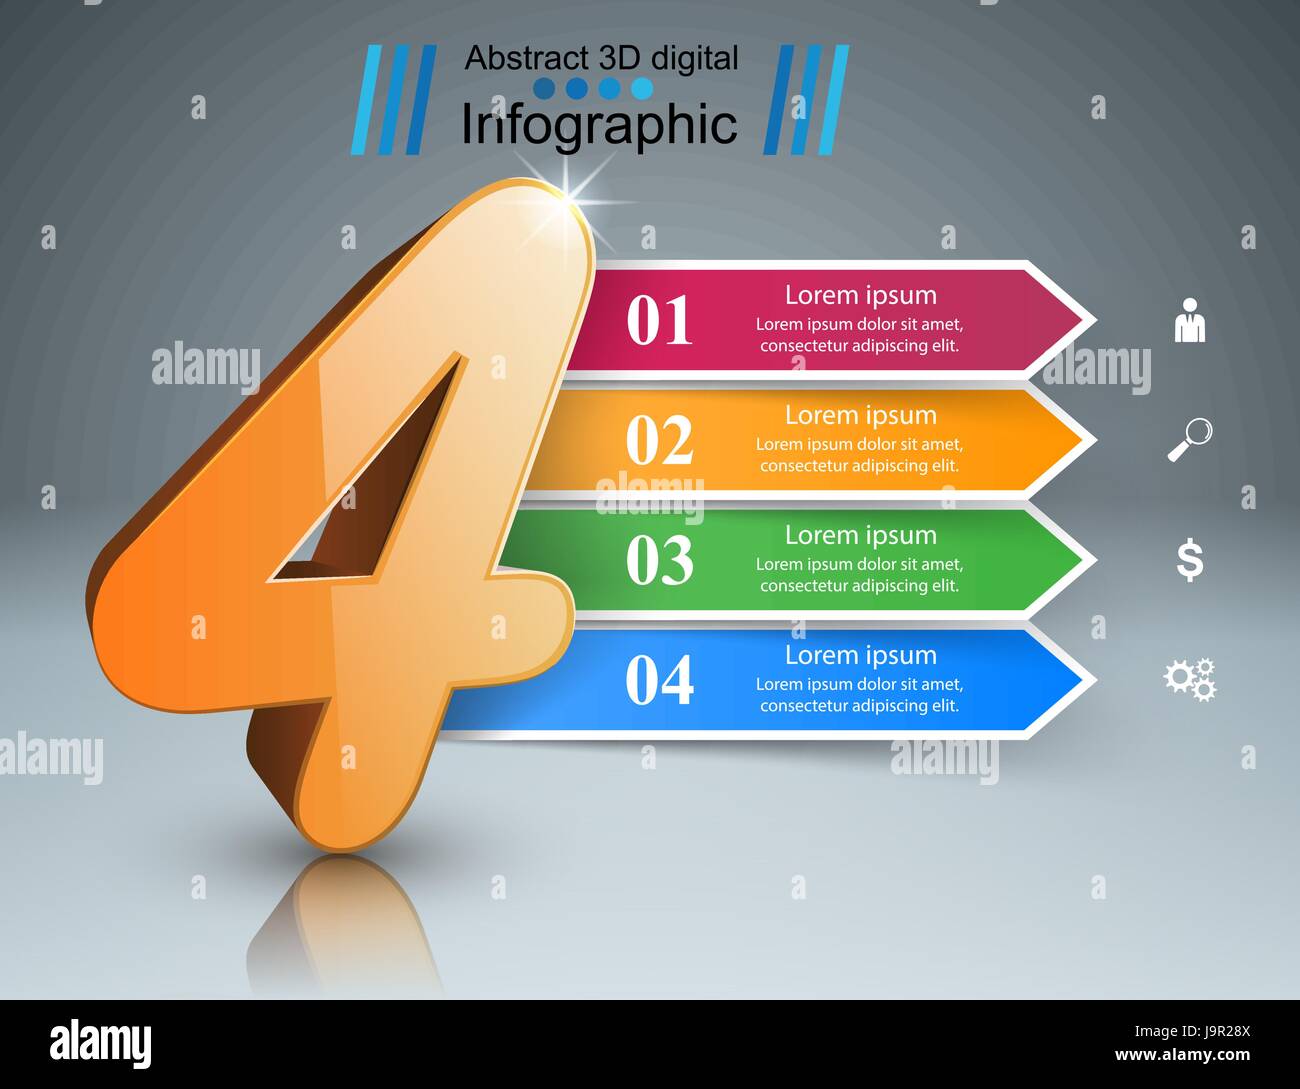 Abstract 3D digital illustration Infographic. Marketing info Stock Vector